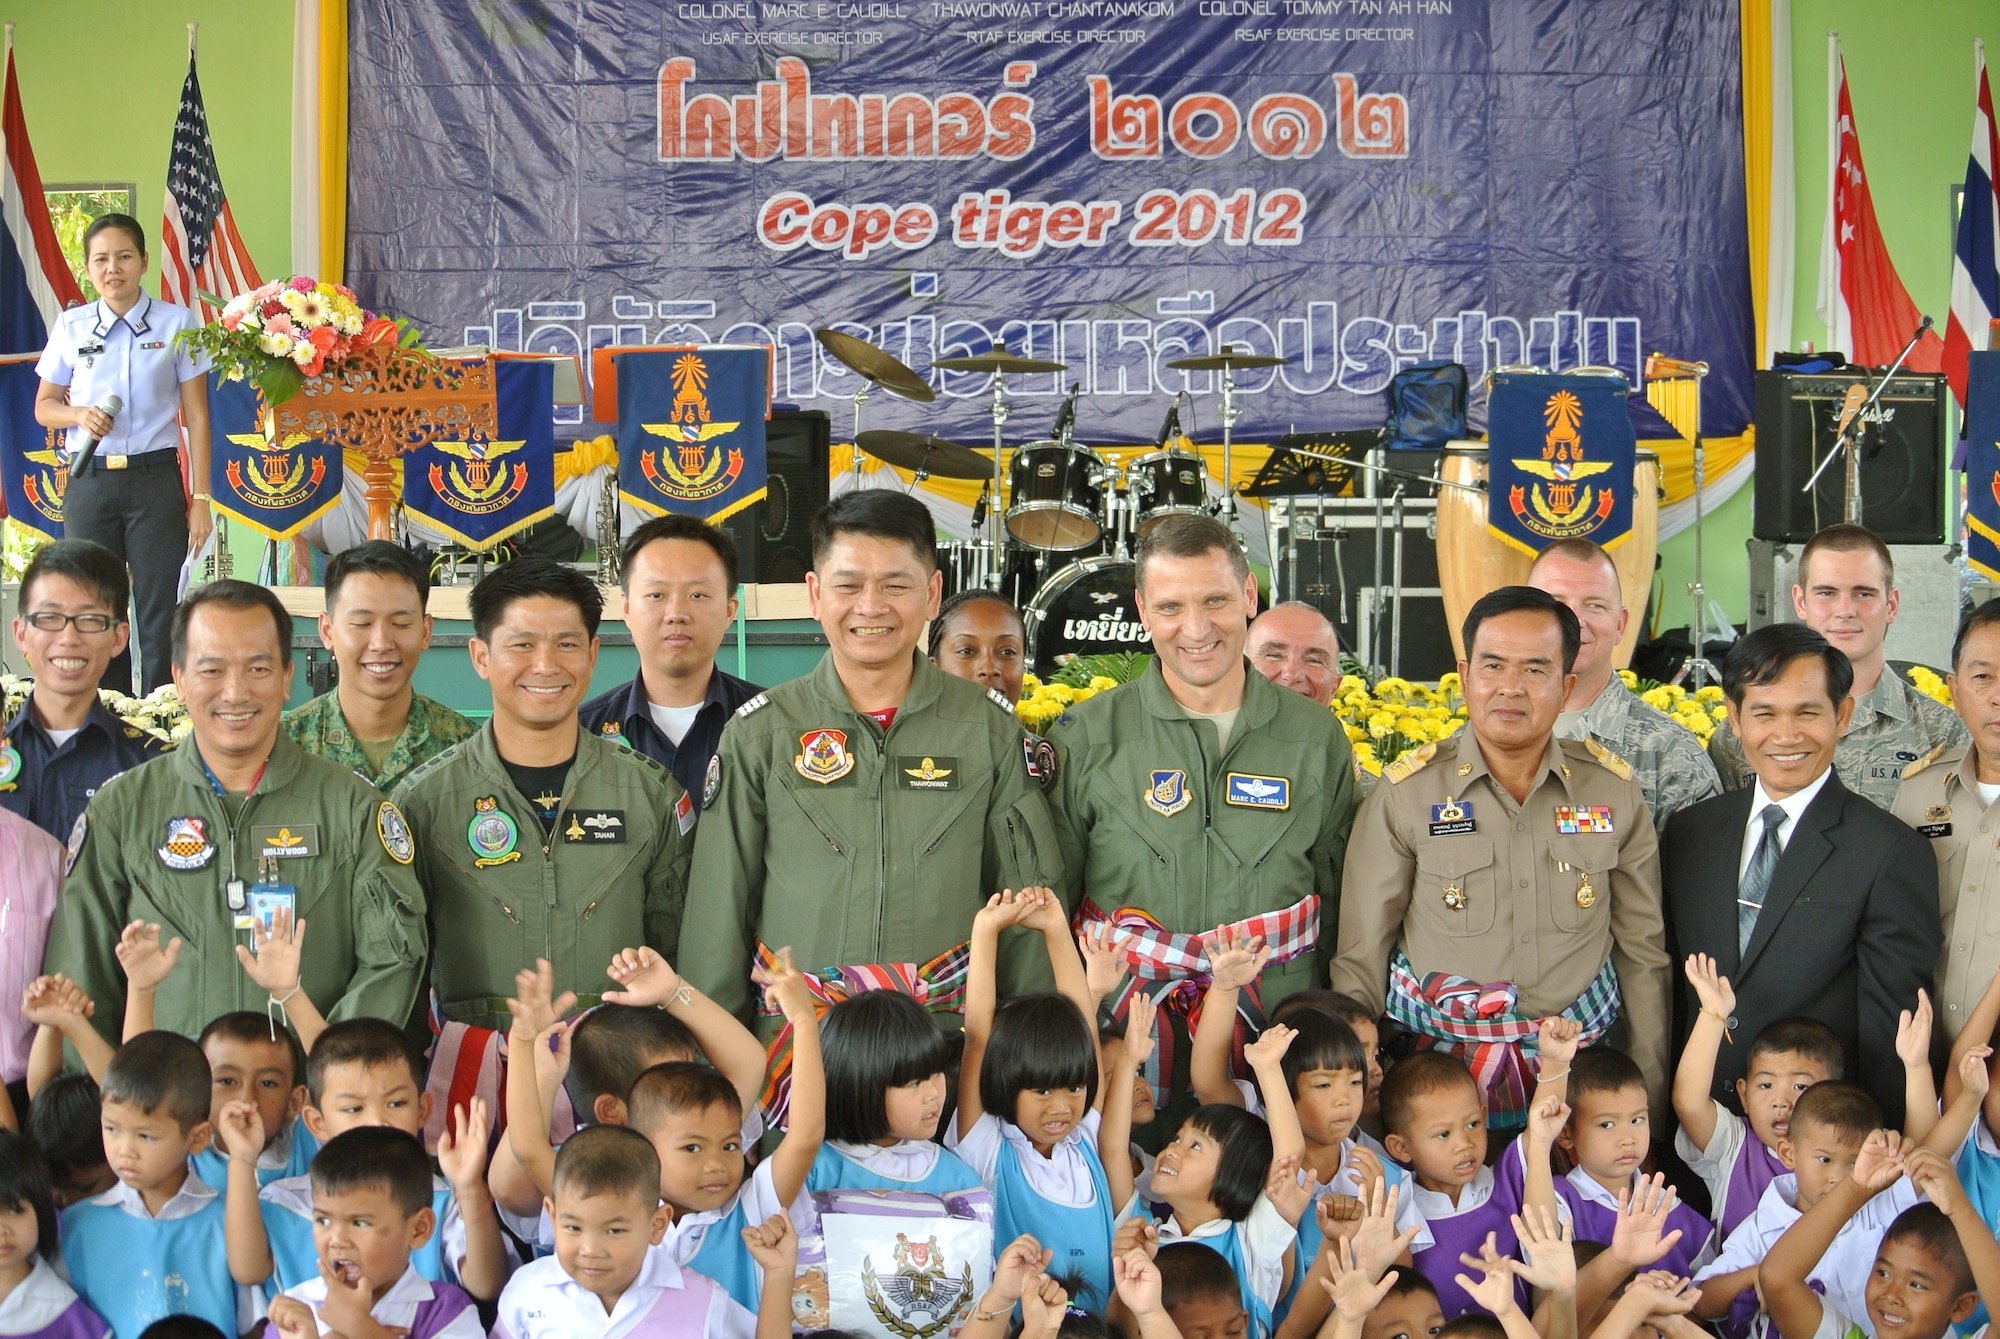 Cope Tiger exercise directors from the U.S. Air Force, Republic of Singapore Air Force and host, Royal Thai Air Force, pose for a group photo with students from the Watprommarat School here during a community outreach and cultural exchange event, Mar. 13. The 269-student school was visited by more than 40-Airmen from the three nations, currently participating in exercise Cope Tiger, a large force air employment exercise designed to enhance readiness and interoperability among participating nations in the Asia-Pacific region. (U.S. Air Force Photo/Capt. David Herndon)